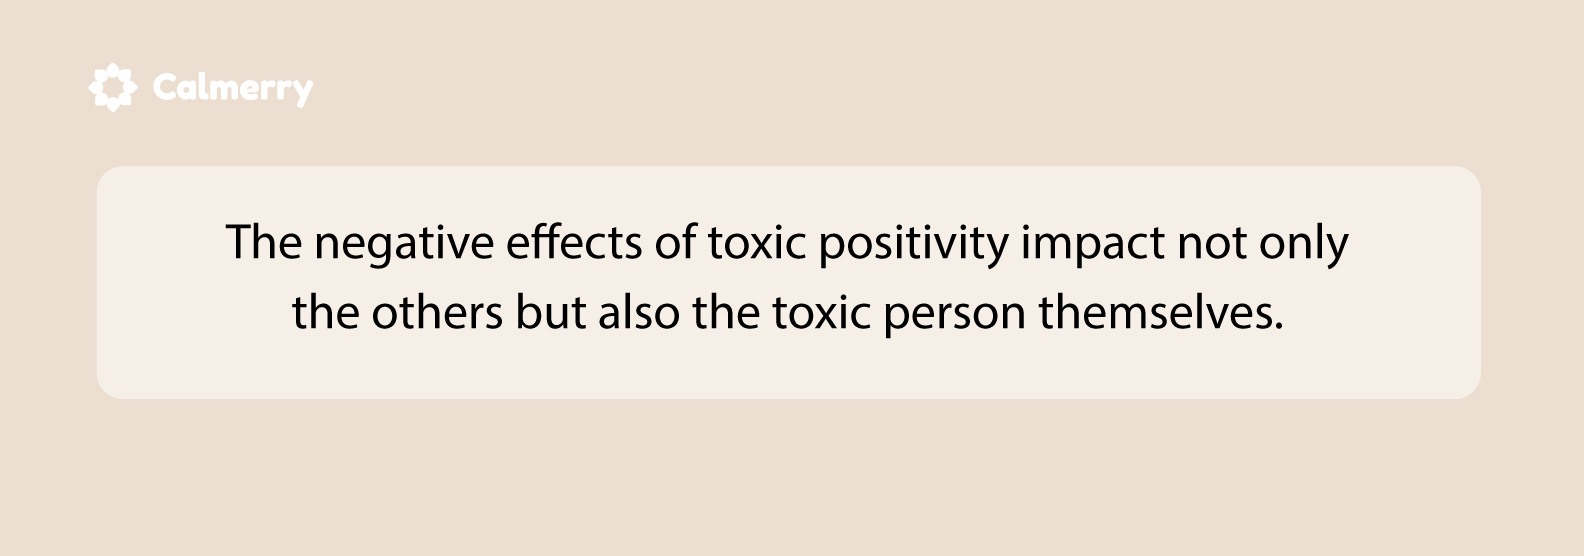 Toxic positivity impacts the toxic person, as well as the others